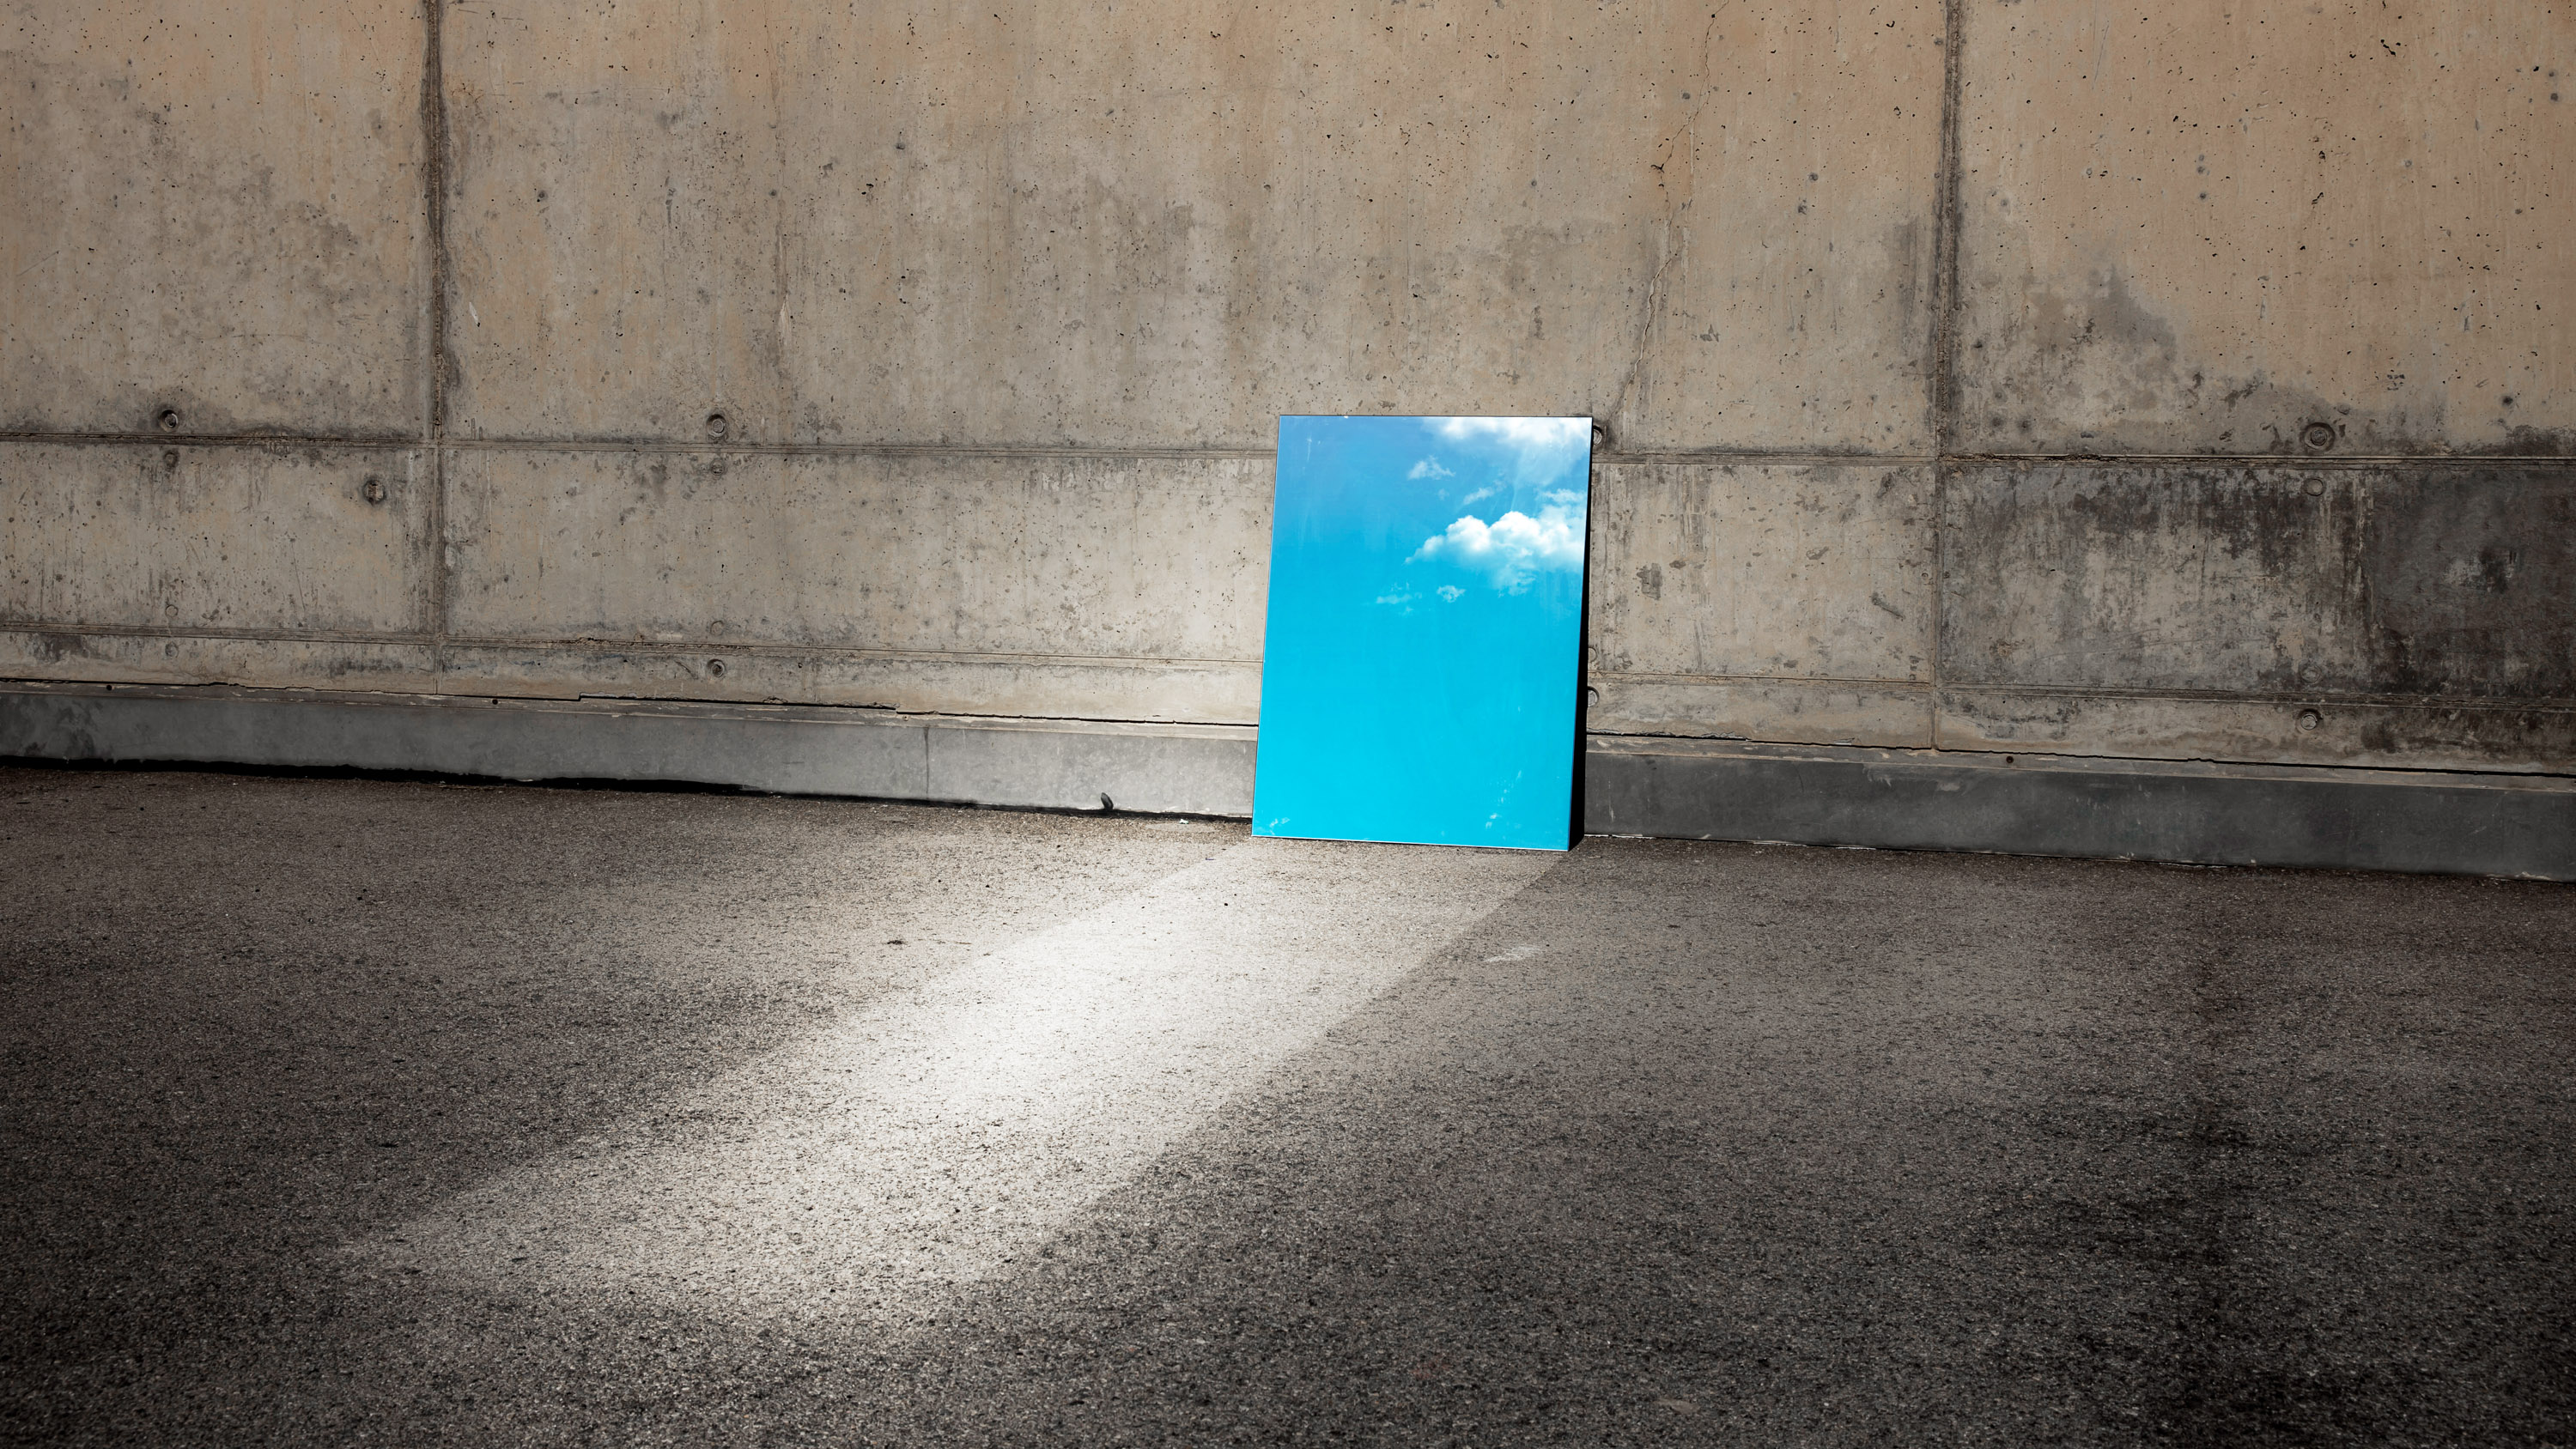 a mirror resting against a concrete wall reflects skylight onto the pavement